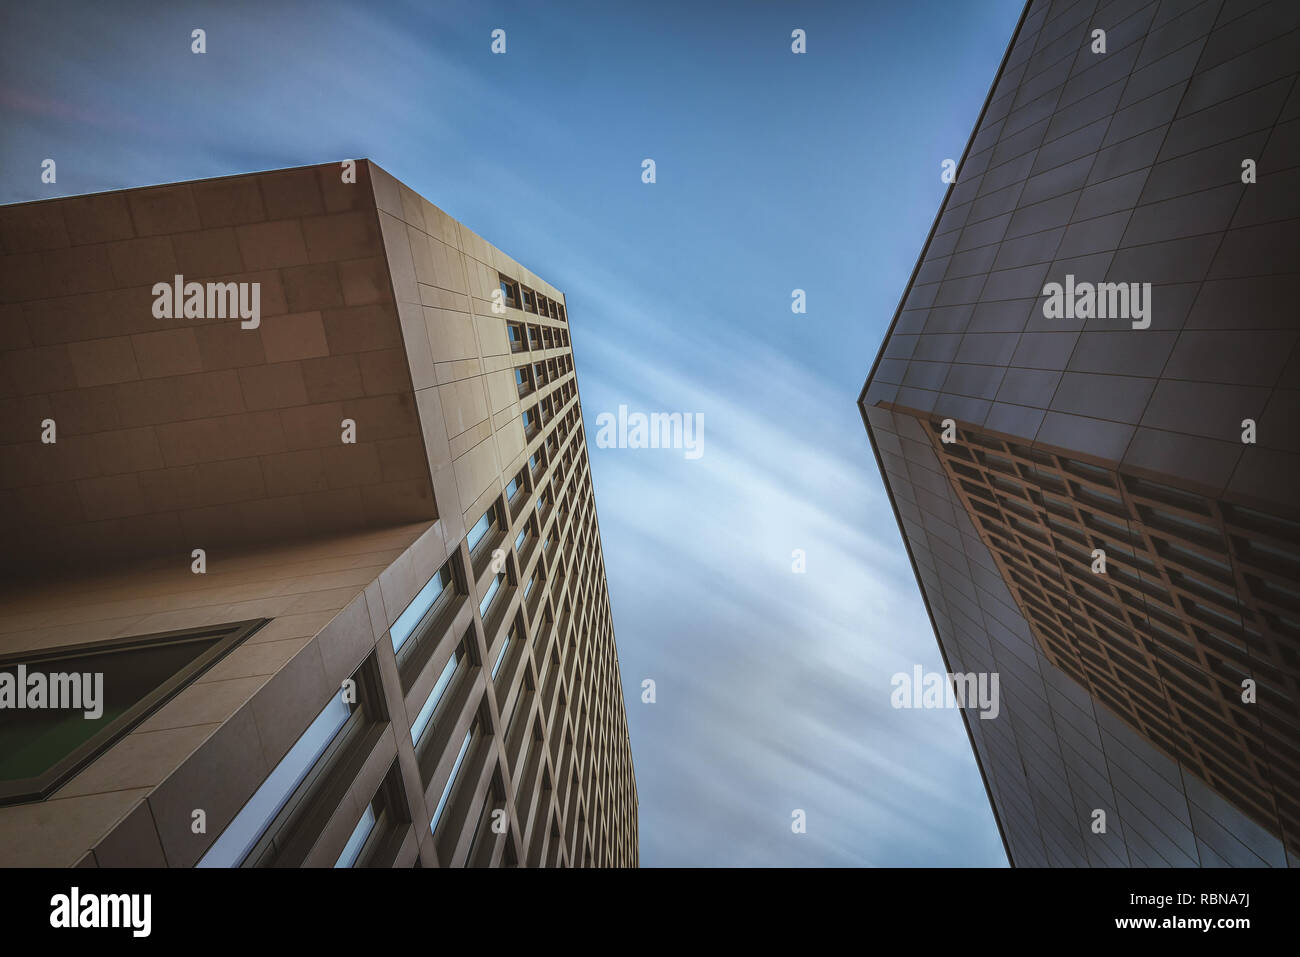 Office buildings in hanover, germany Stock Photo